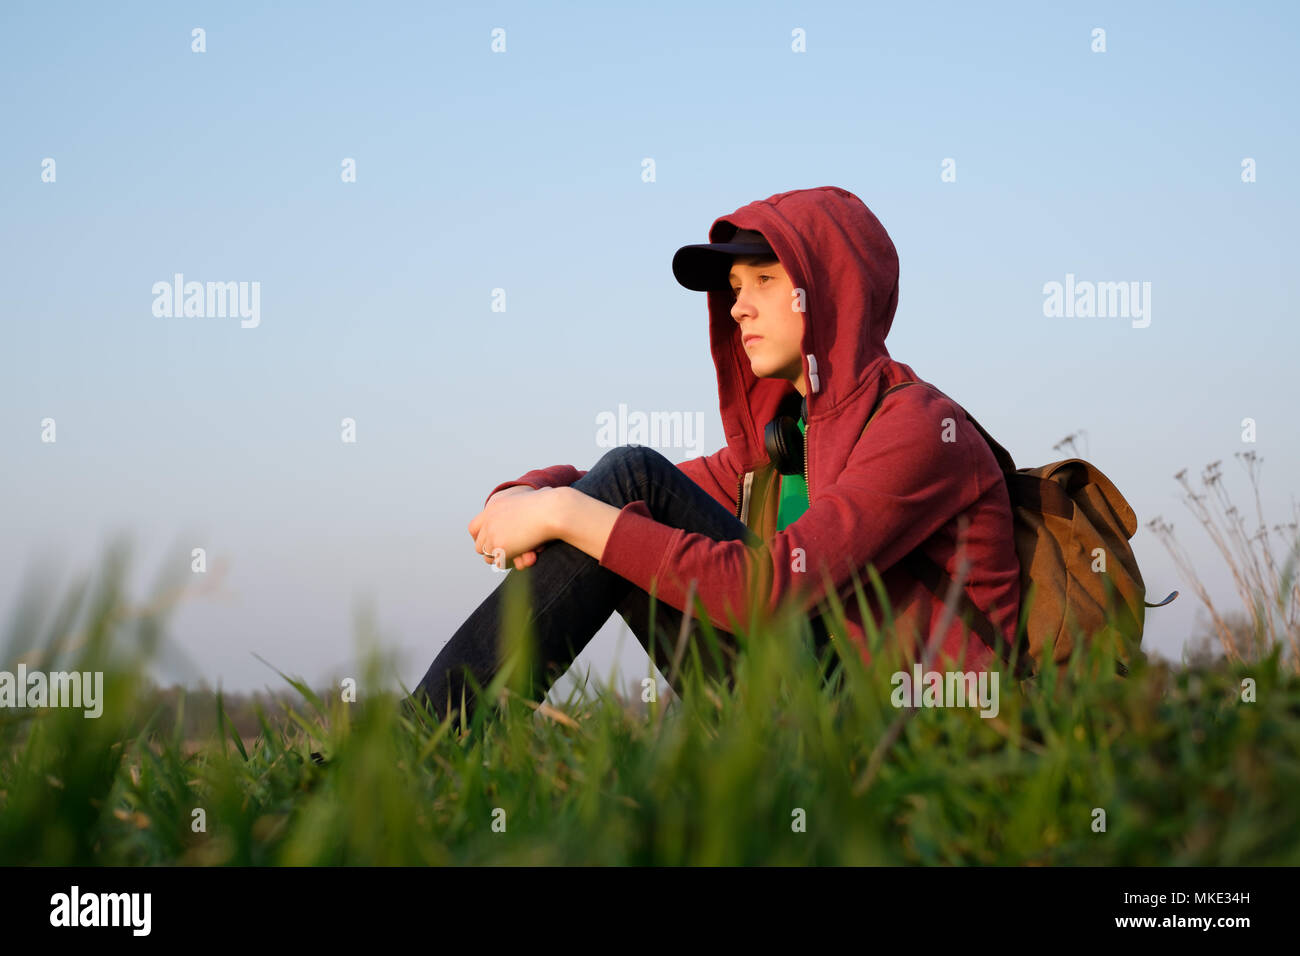 Teenager on green lawn Stock Photo